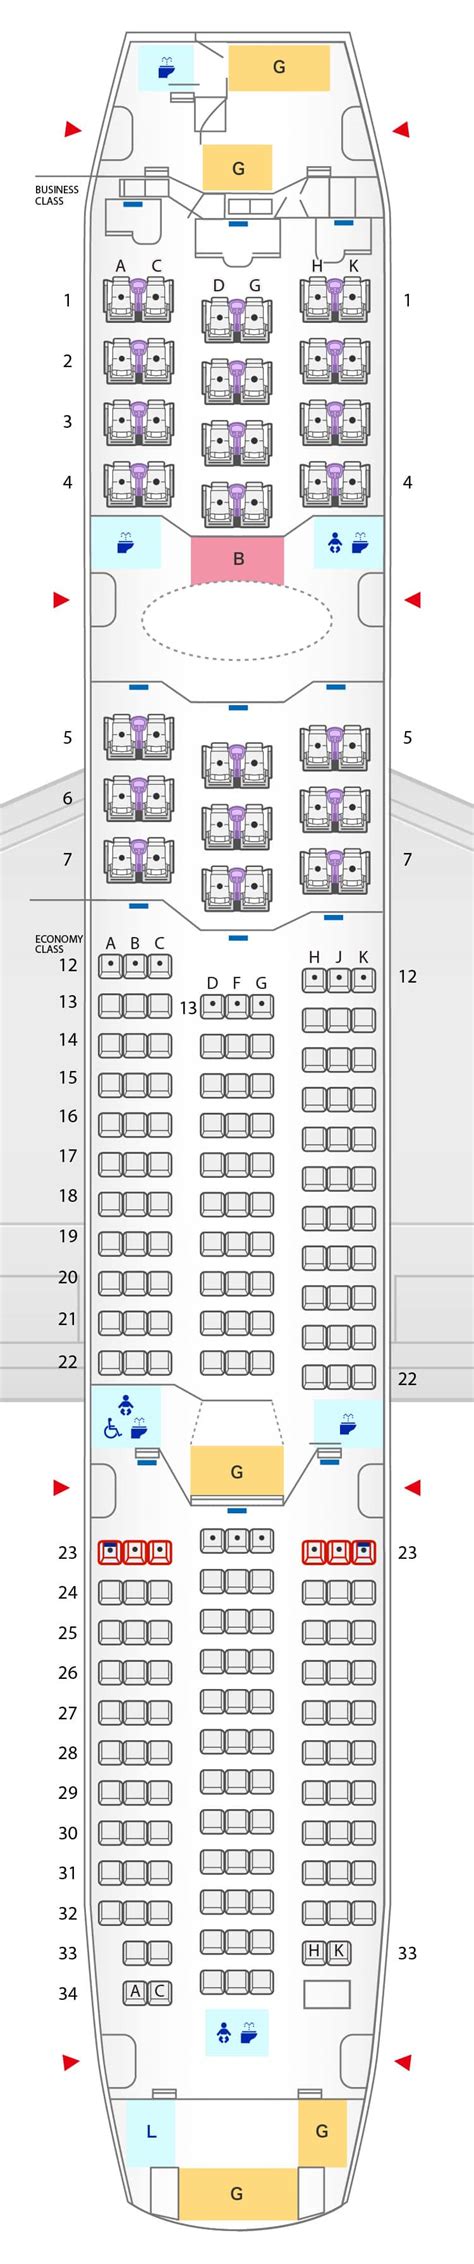 boeing 787-8 seating chart